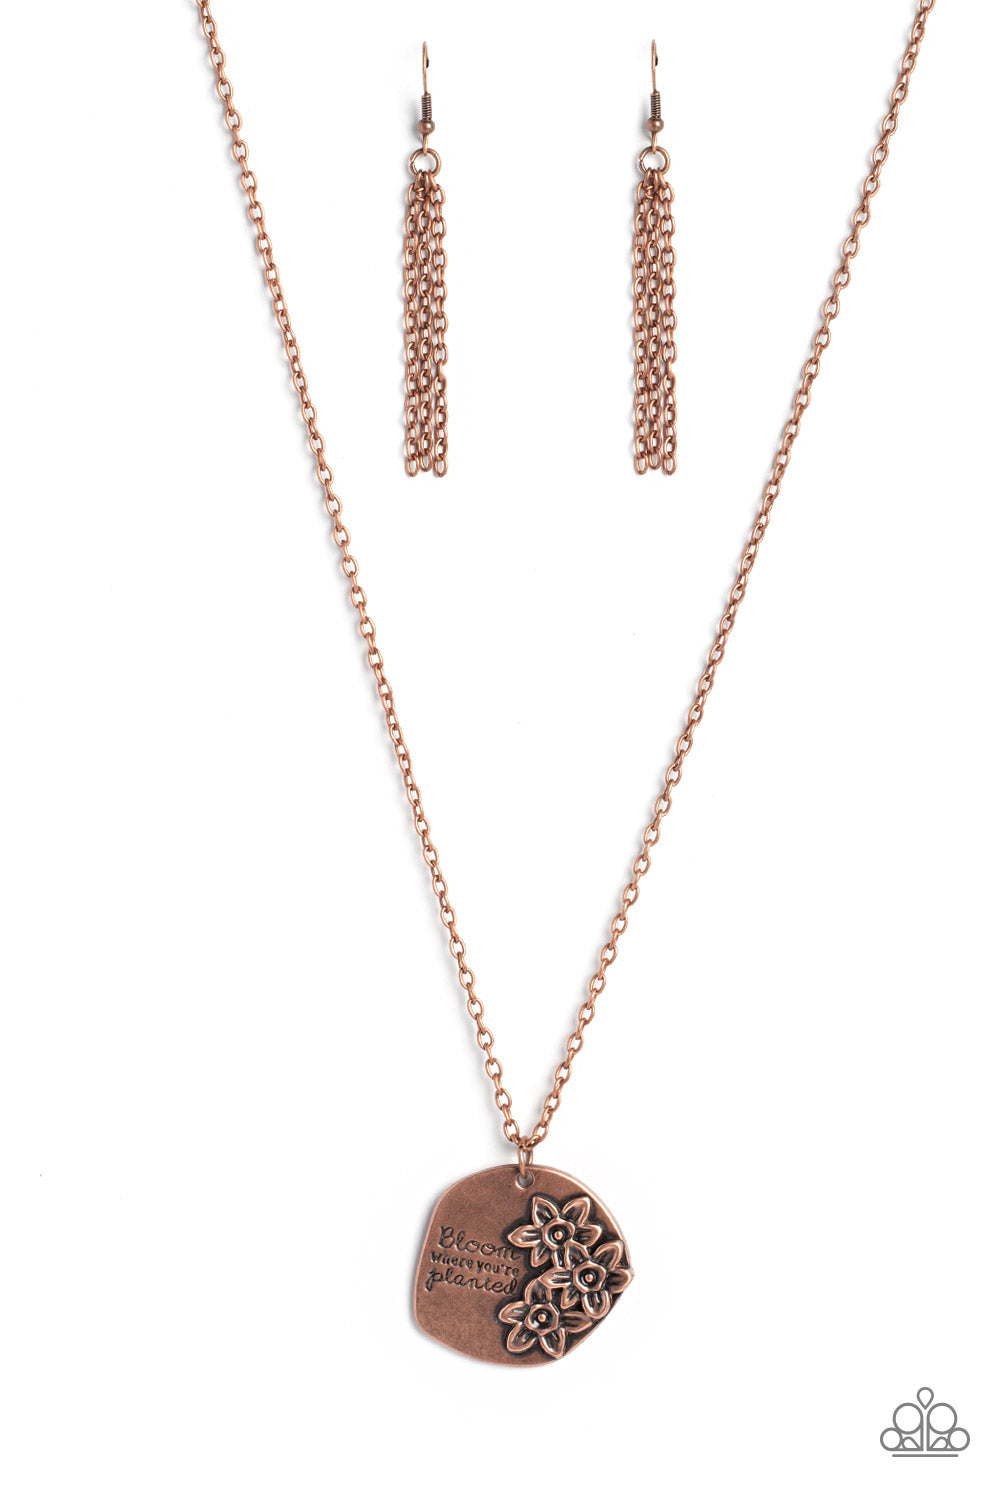 Planted Possibilities Paparazzi Accessories Necklace with Earrings Copper